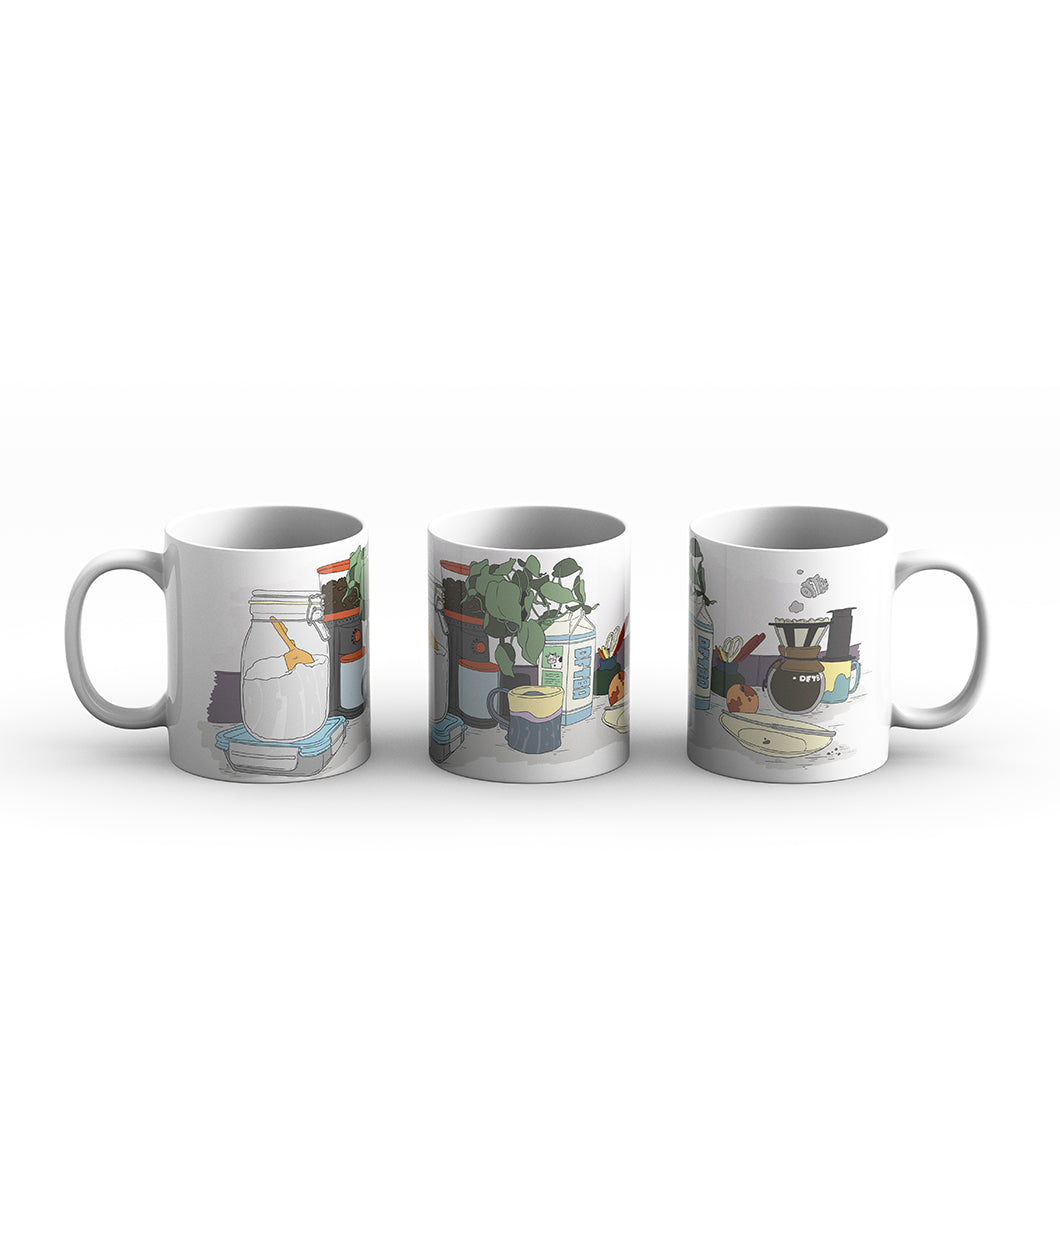 A line of three white mugs each showing a different portion of the mug. The illustration on the mug features a plant, brewing coffee in a pour over, and other counter items. 